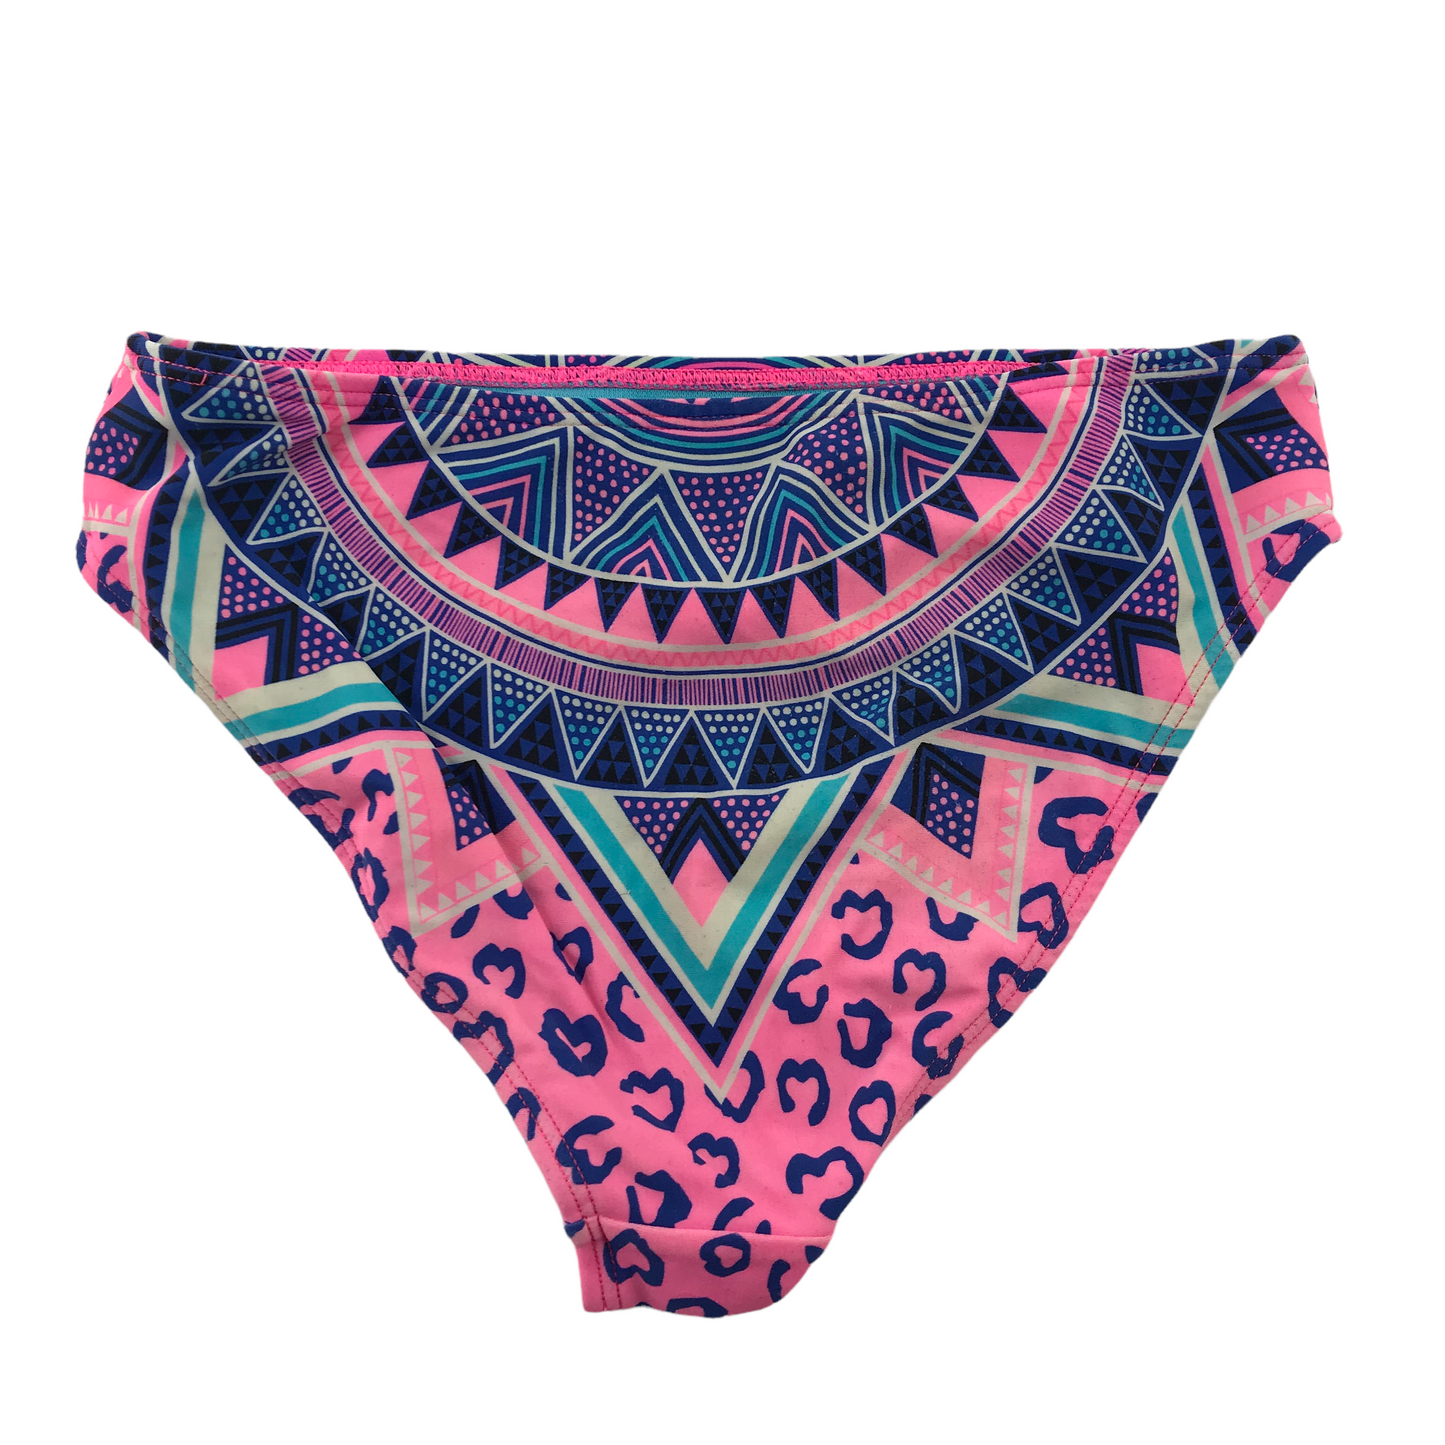 Pineapple by Debbie Moore Blue and Pink 2-piece Swimsuit Age 8